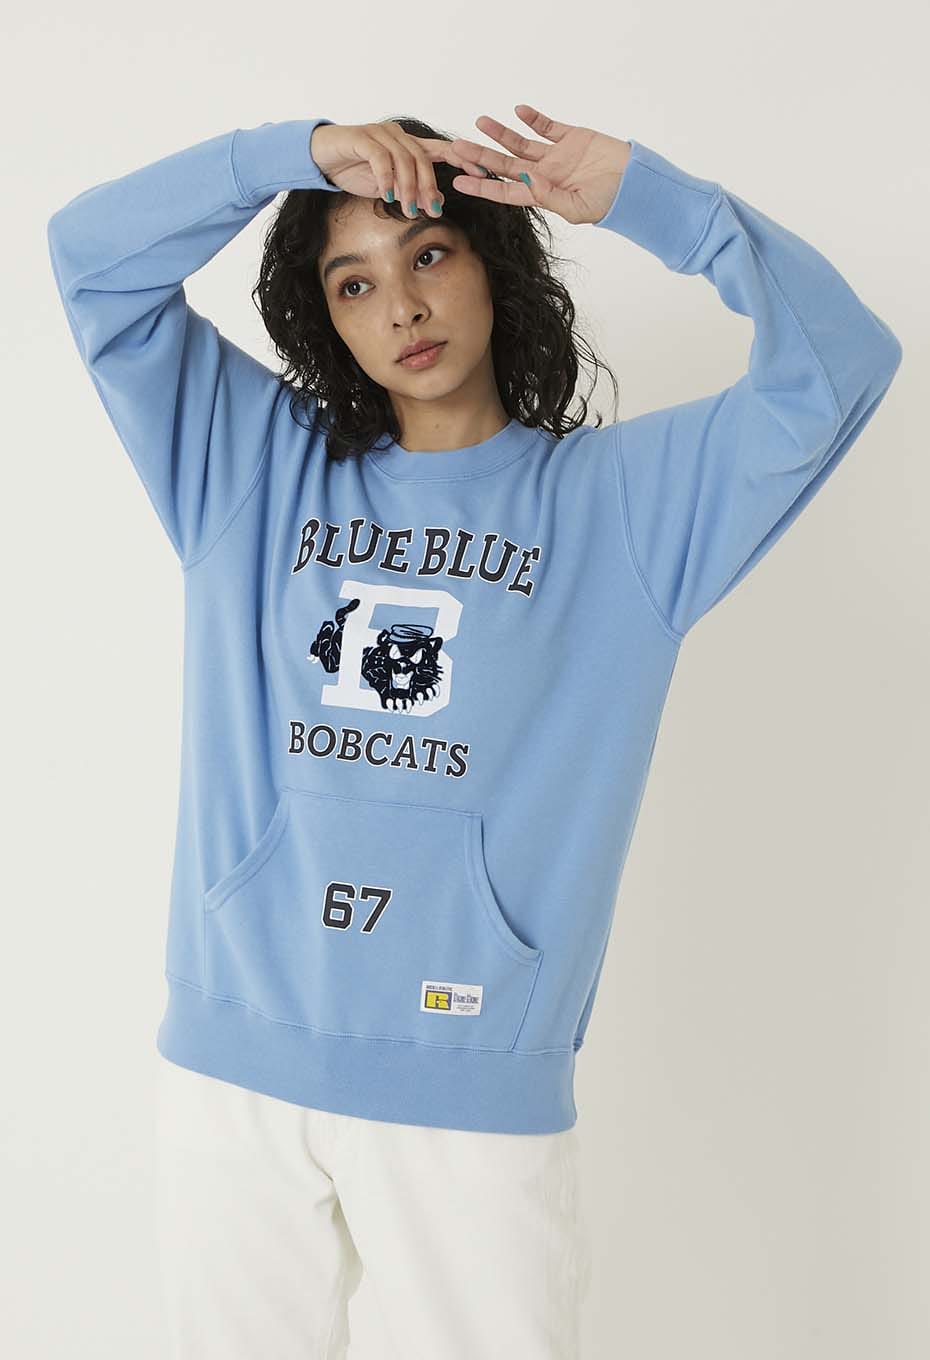 RUSSELL・BLUE BLUE|スウェット|RUSSELL BLUEBLUE ボブキャッツ 67 